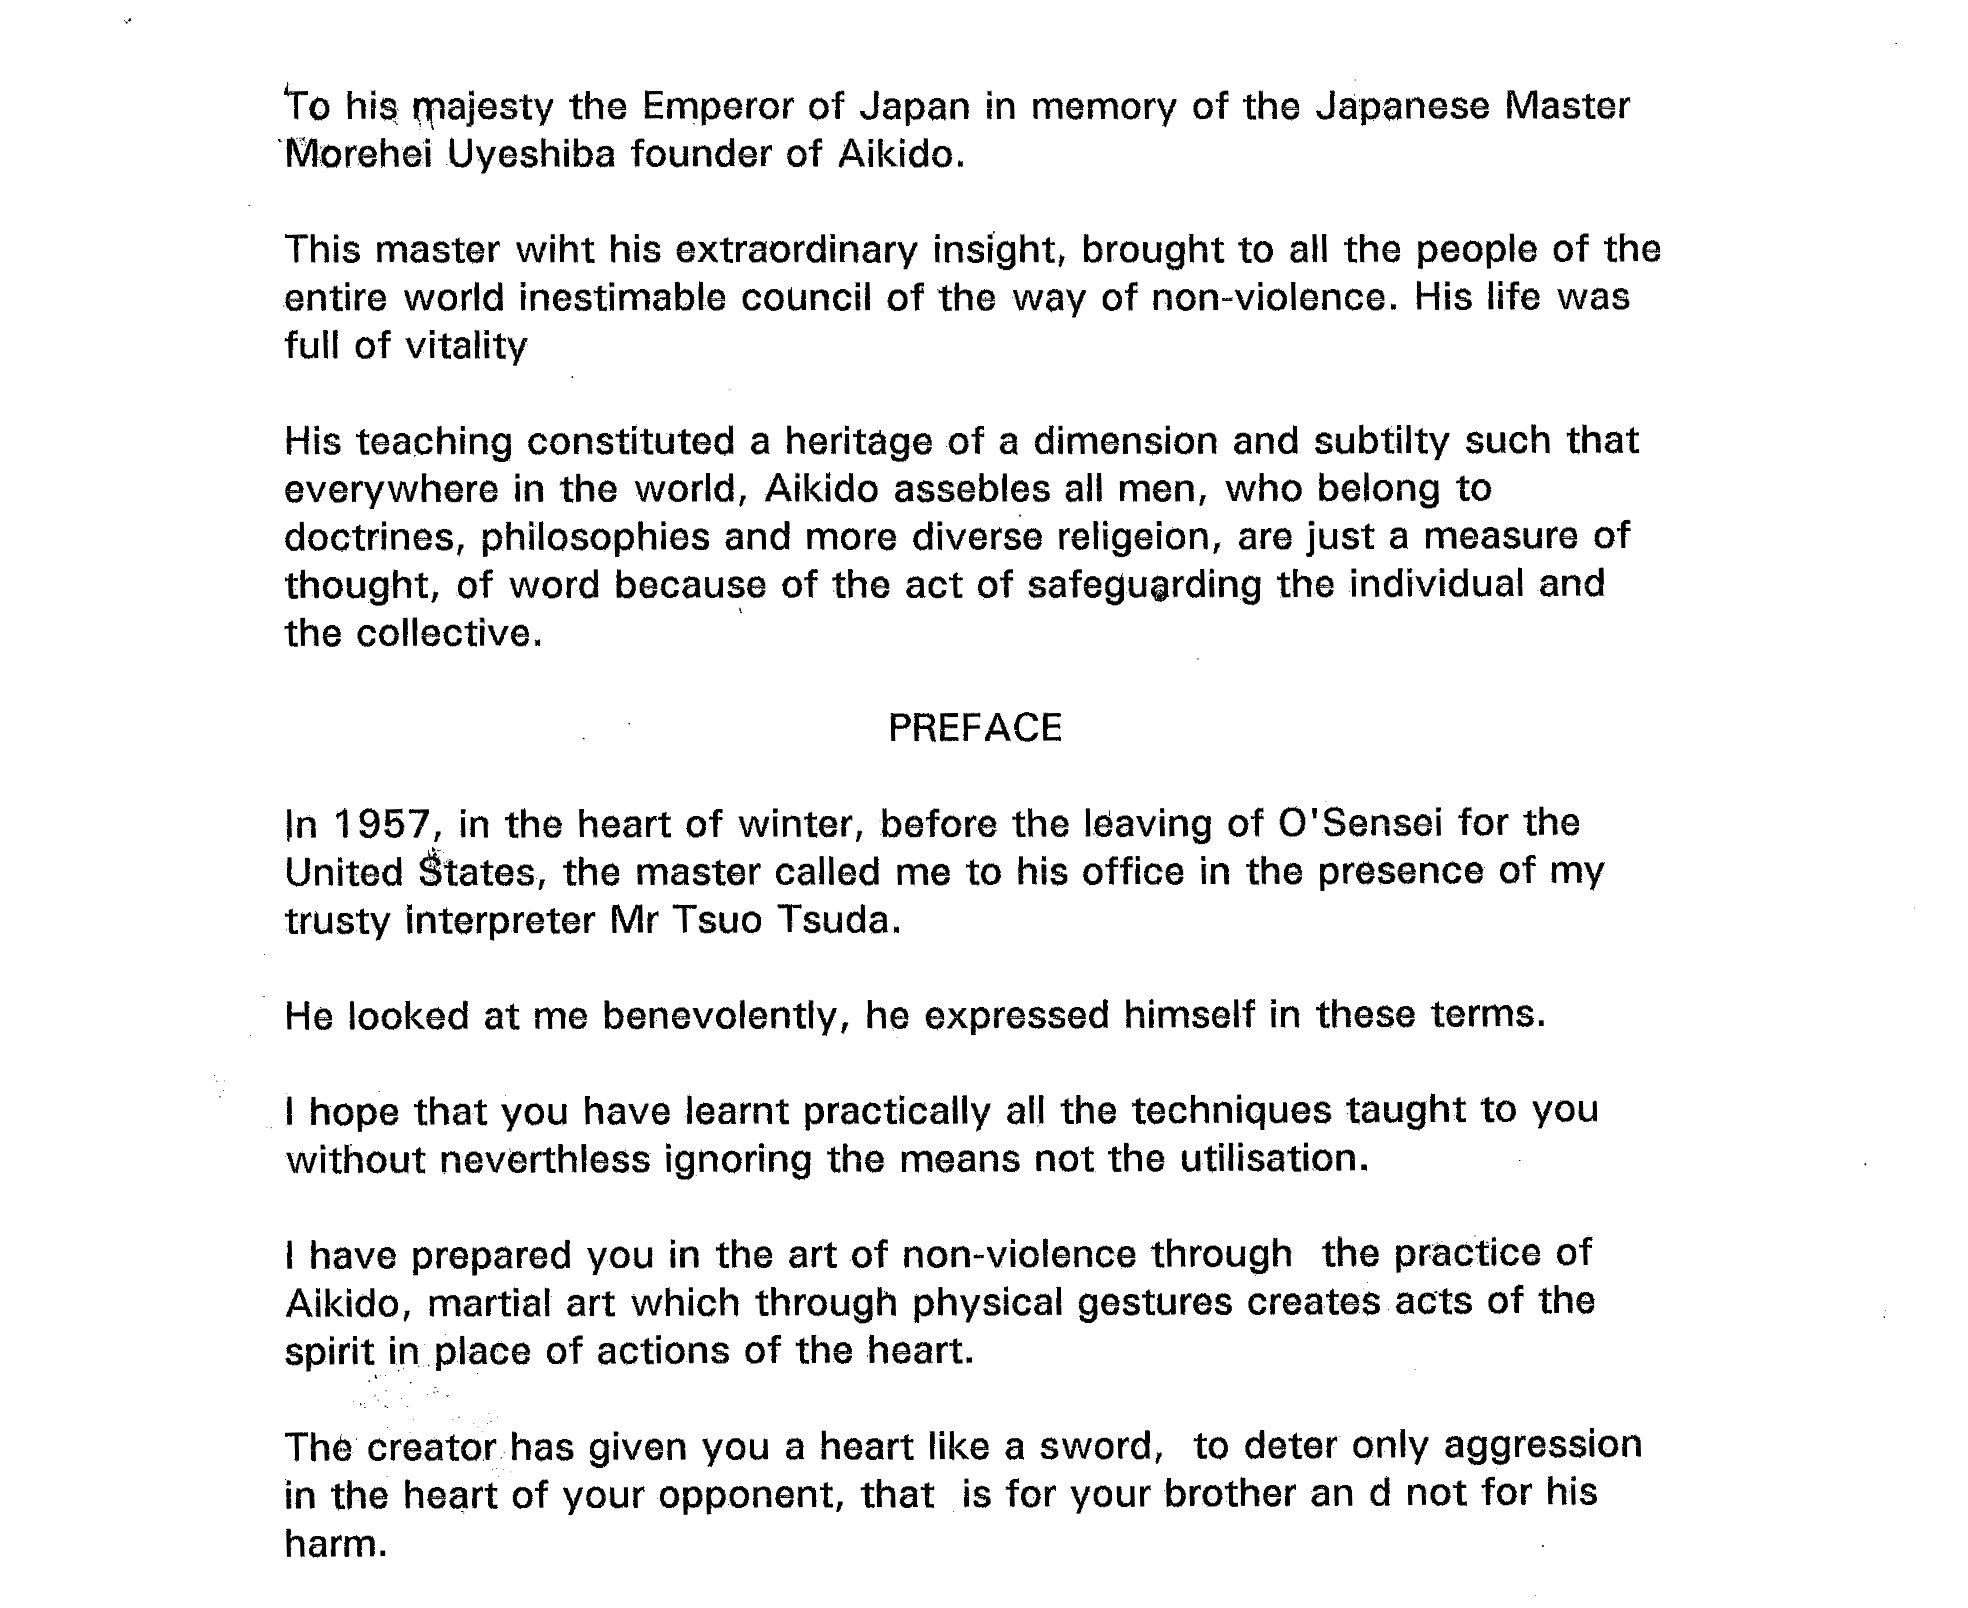 Letter To His Majesty the Emperor of Japan (1991)